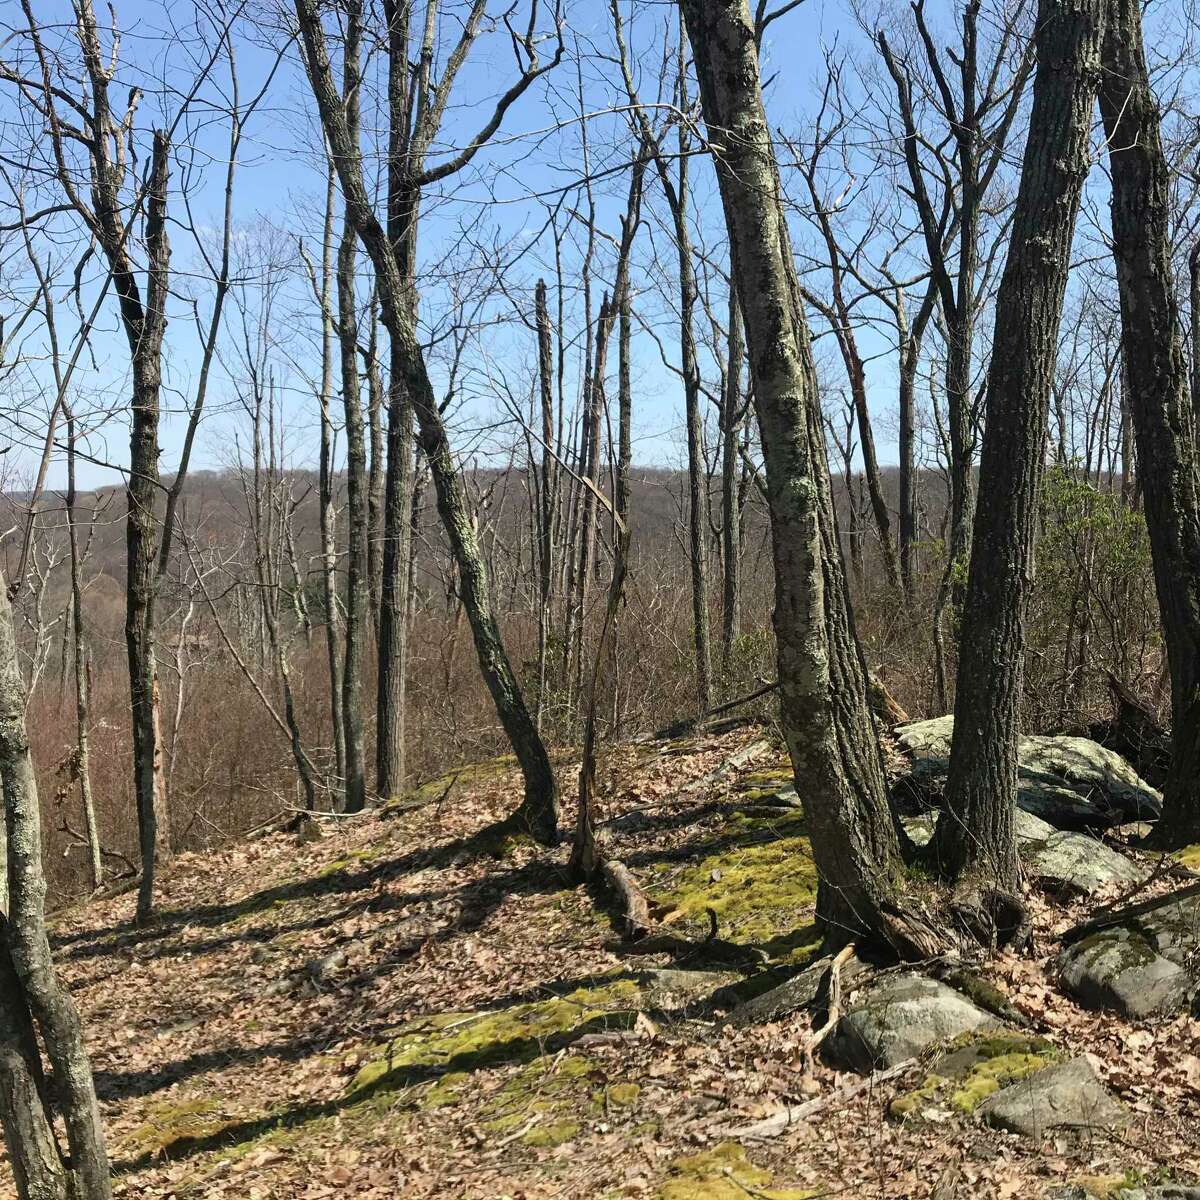 Ridgefield held a public hearing on Jan. 5 to consider the acquisition of roughly 58 acres of land by the Conservation Commission. If approved, the parcel would be designated as open space in perpetuity.